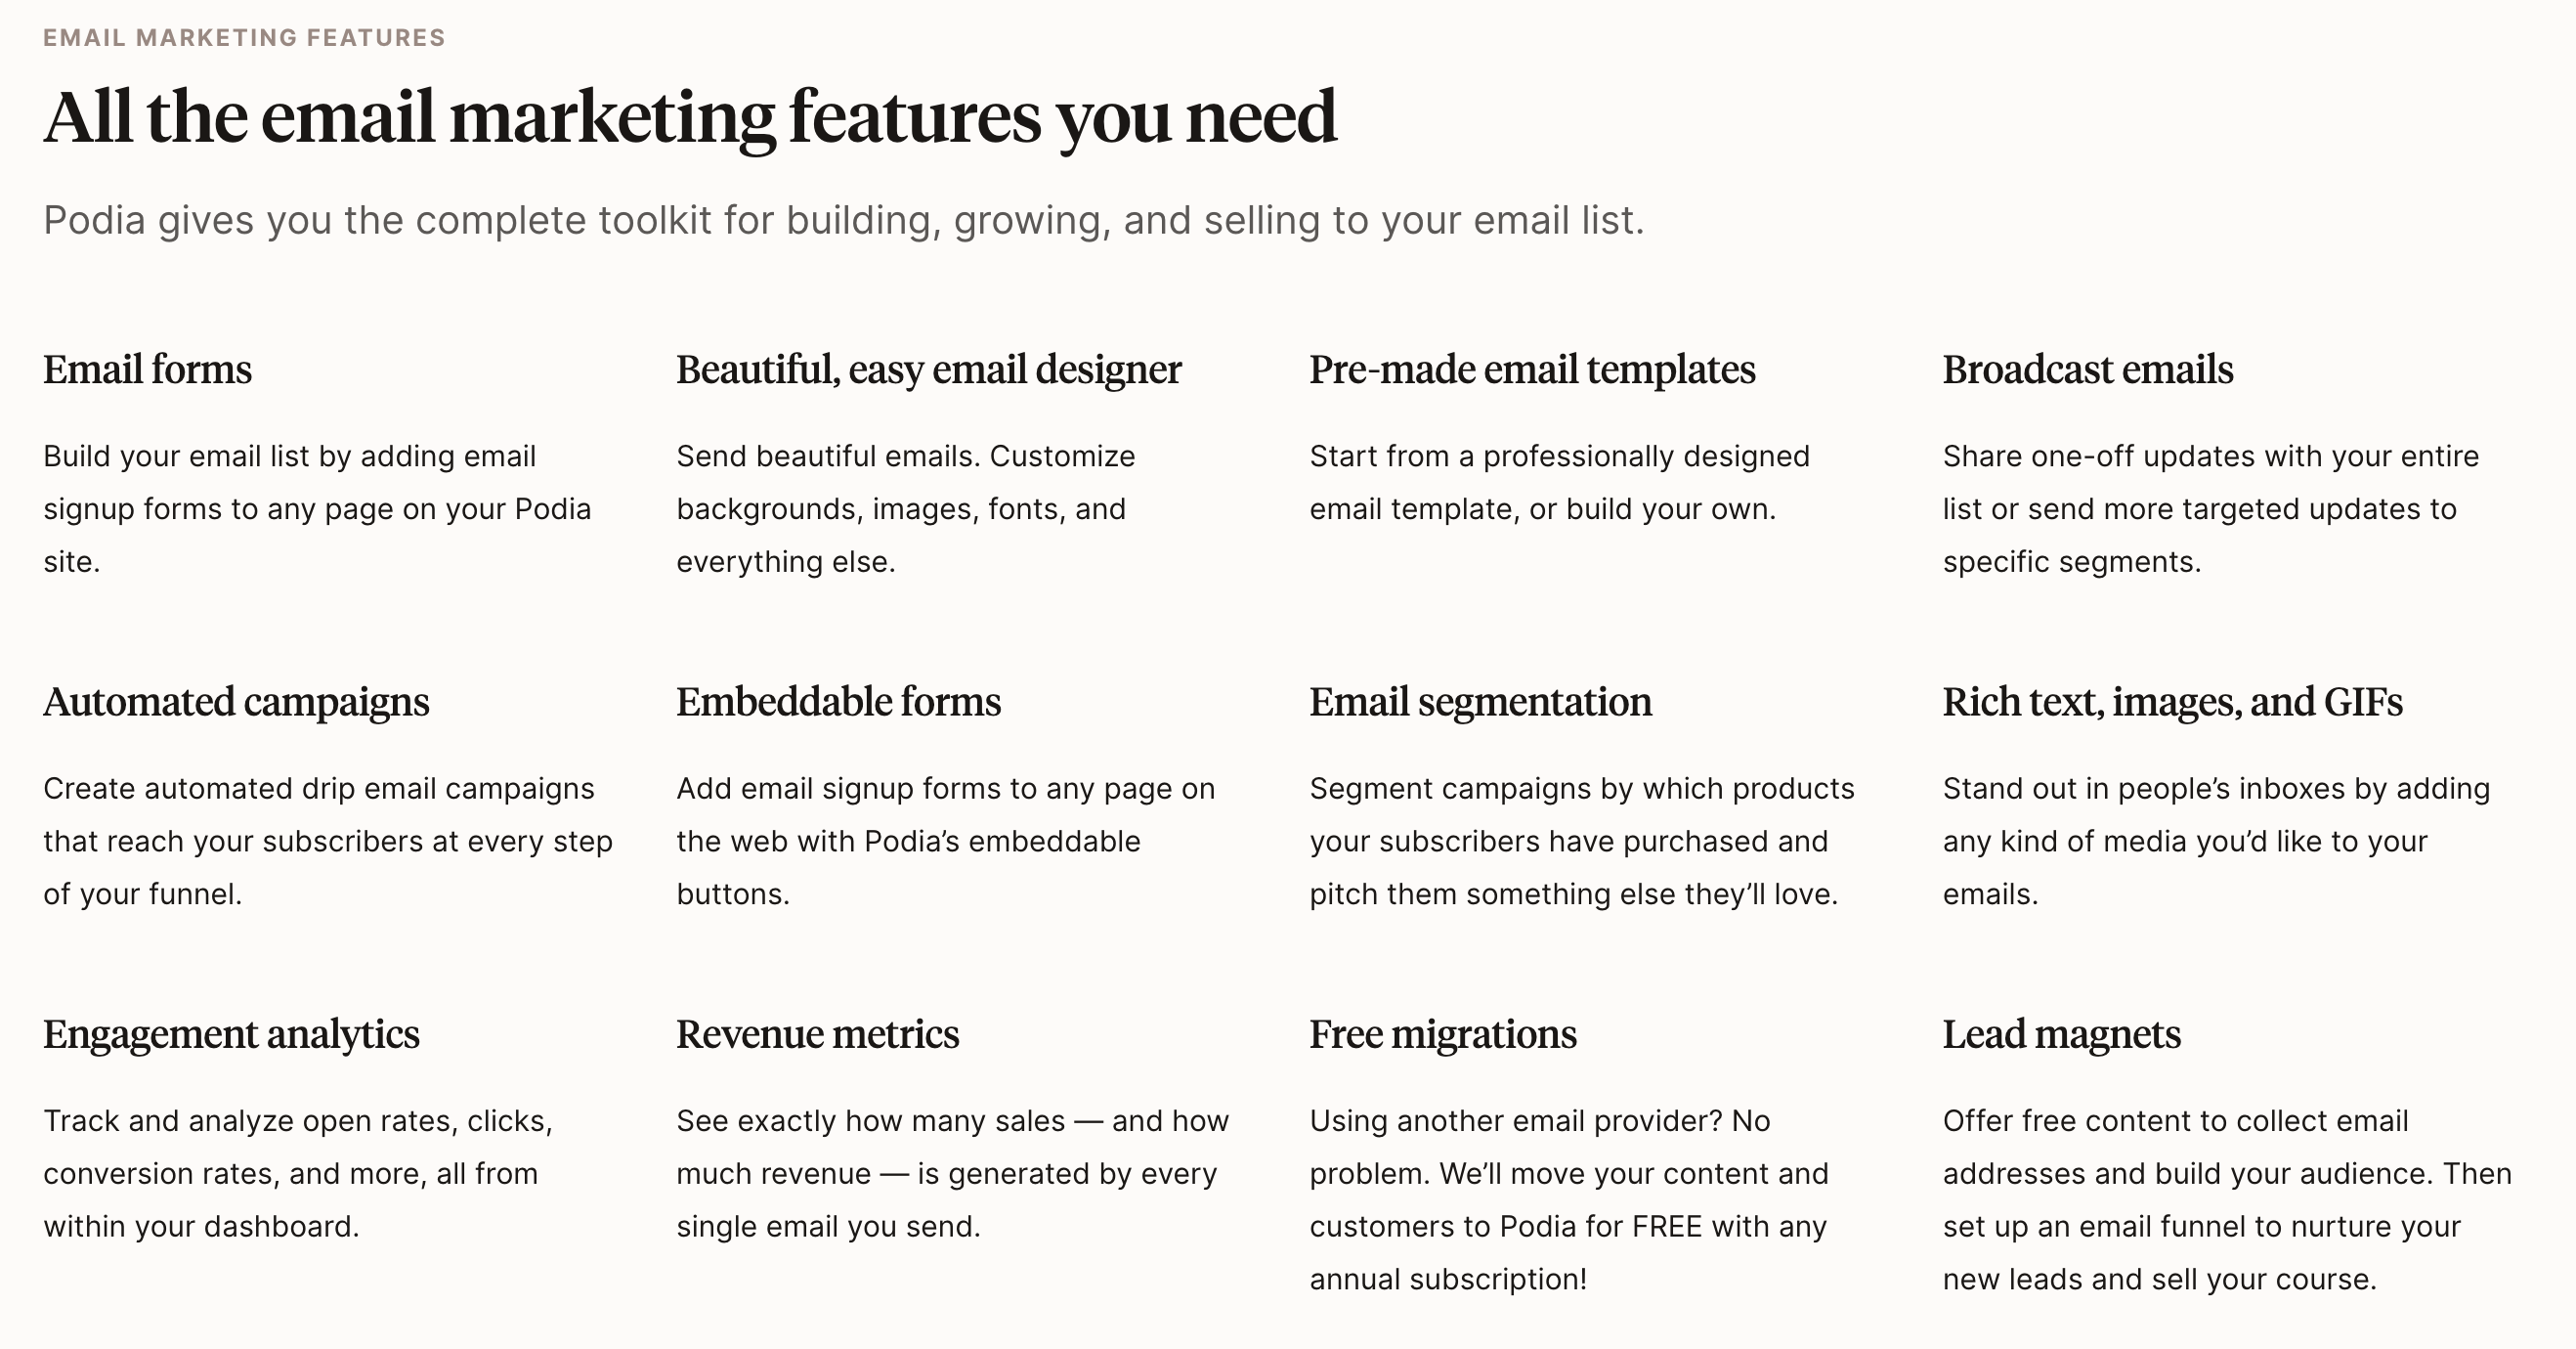 podia email features